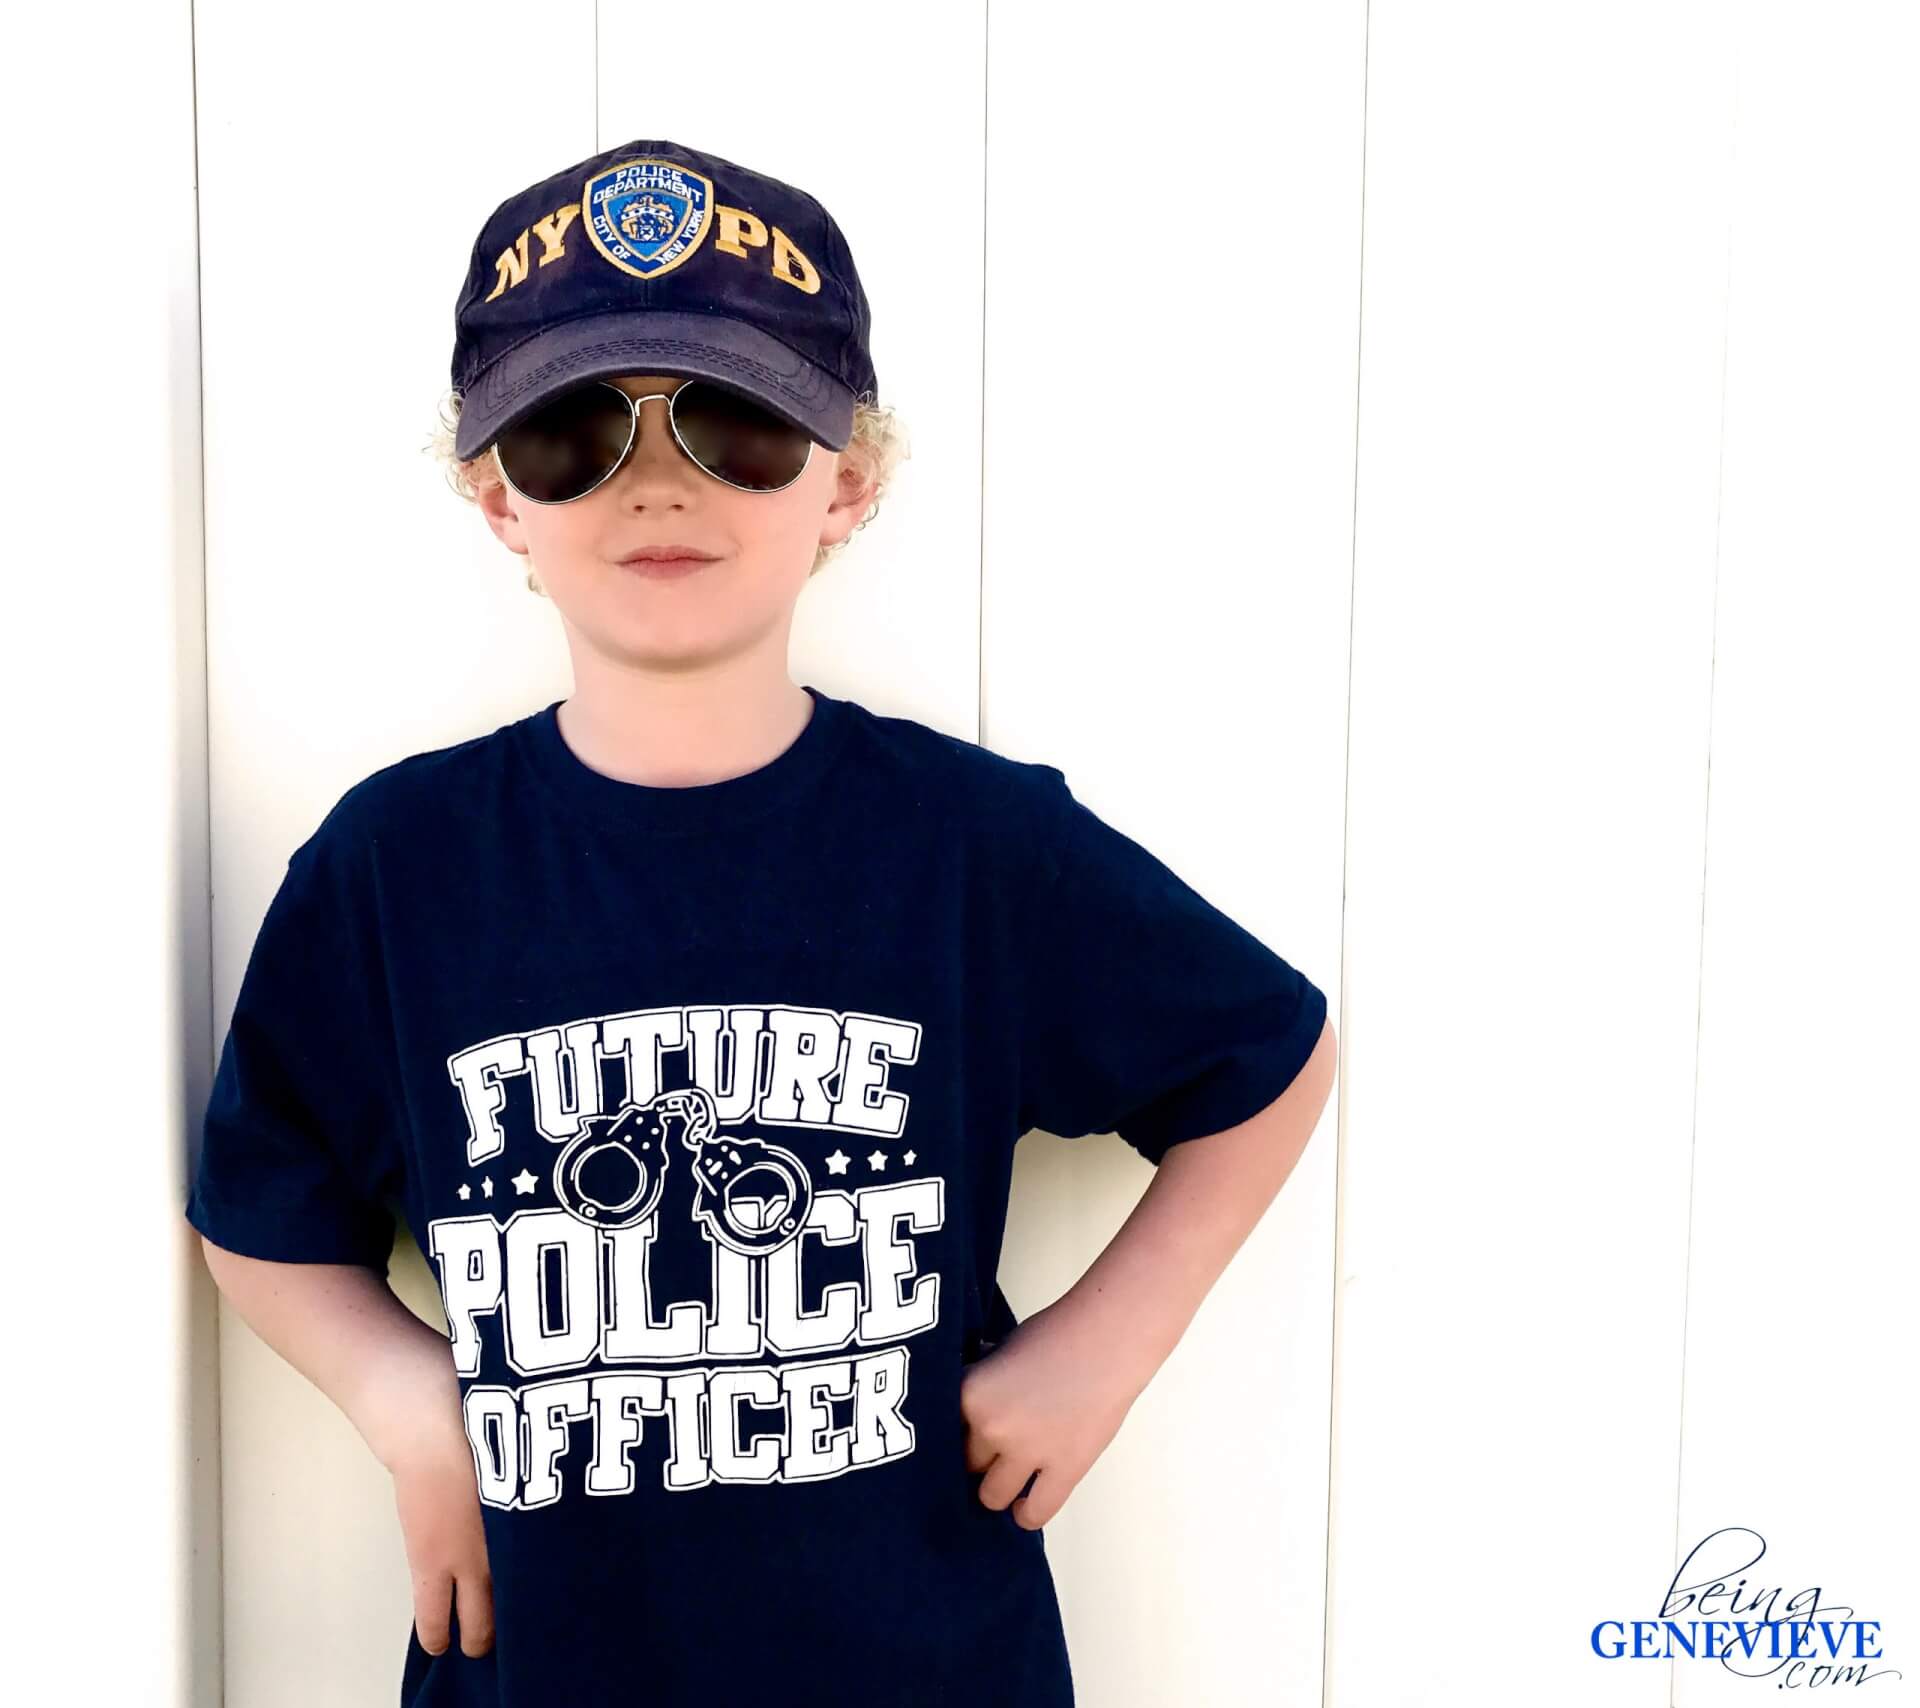 Future Police Officer